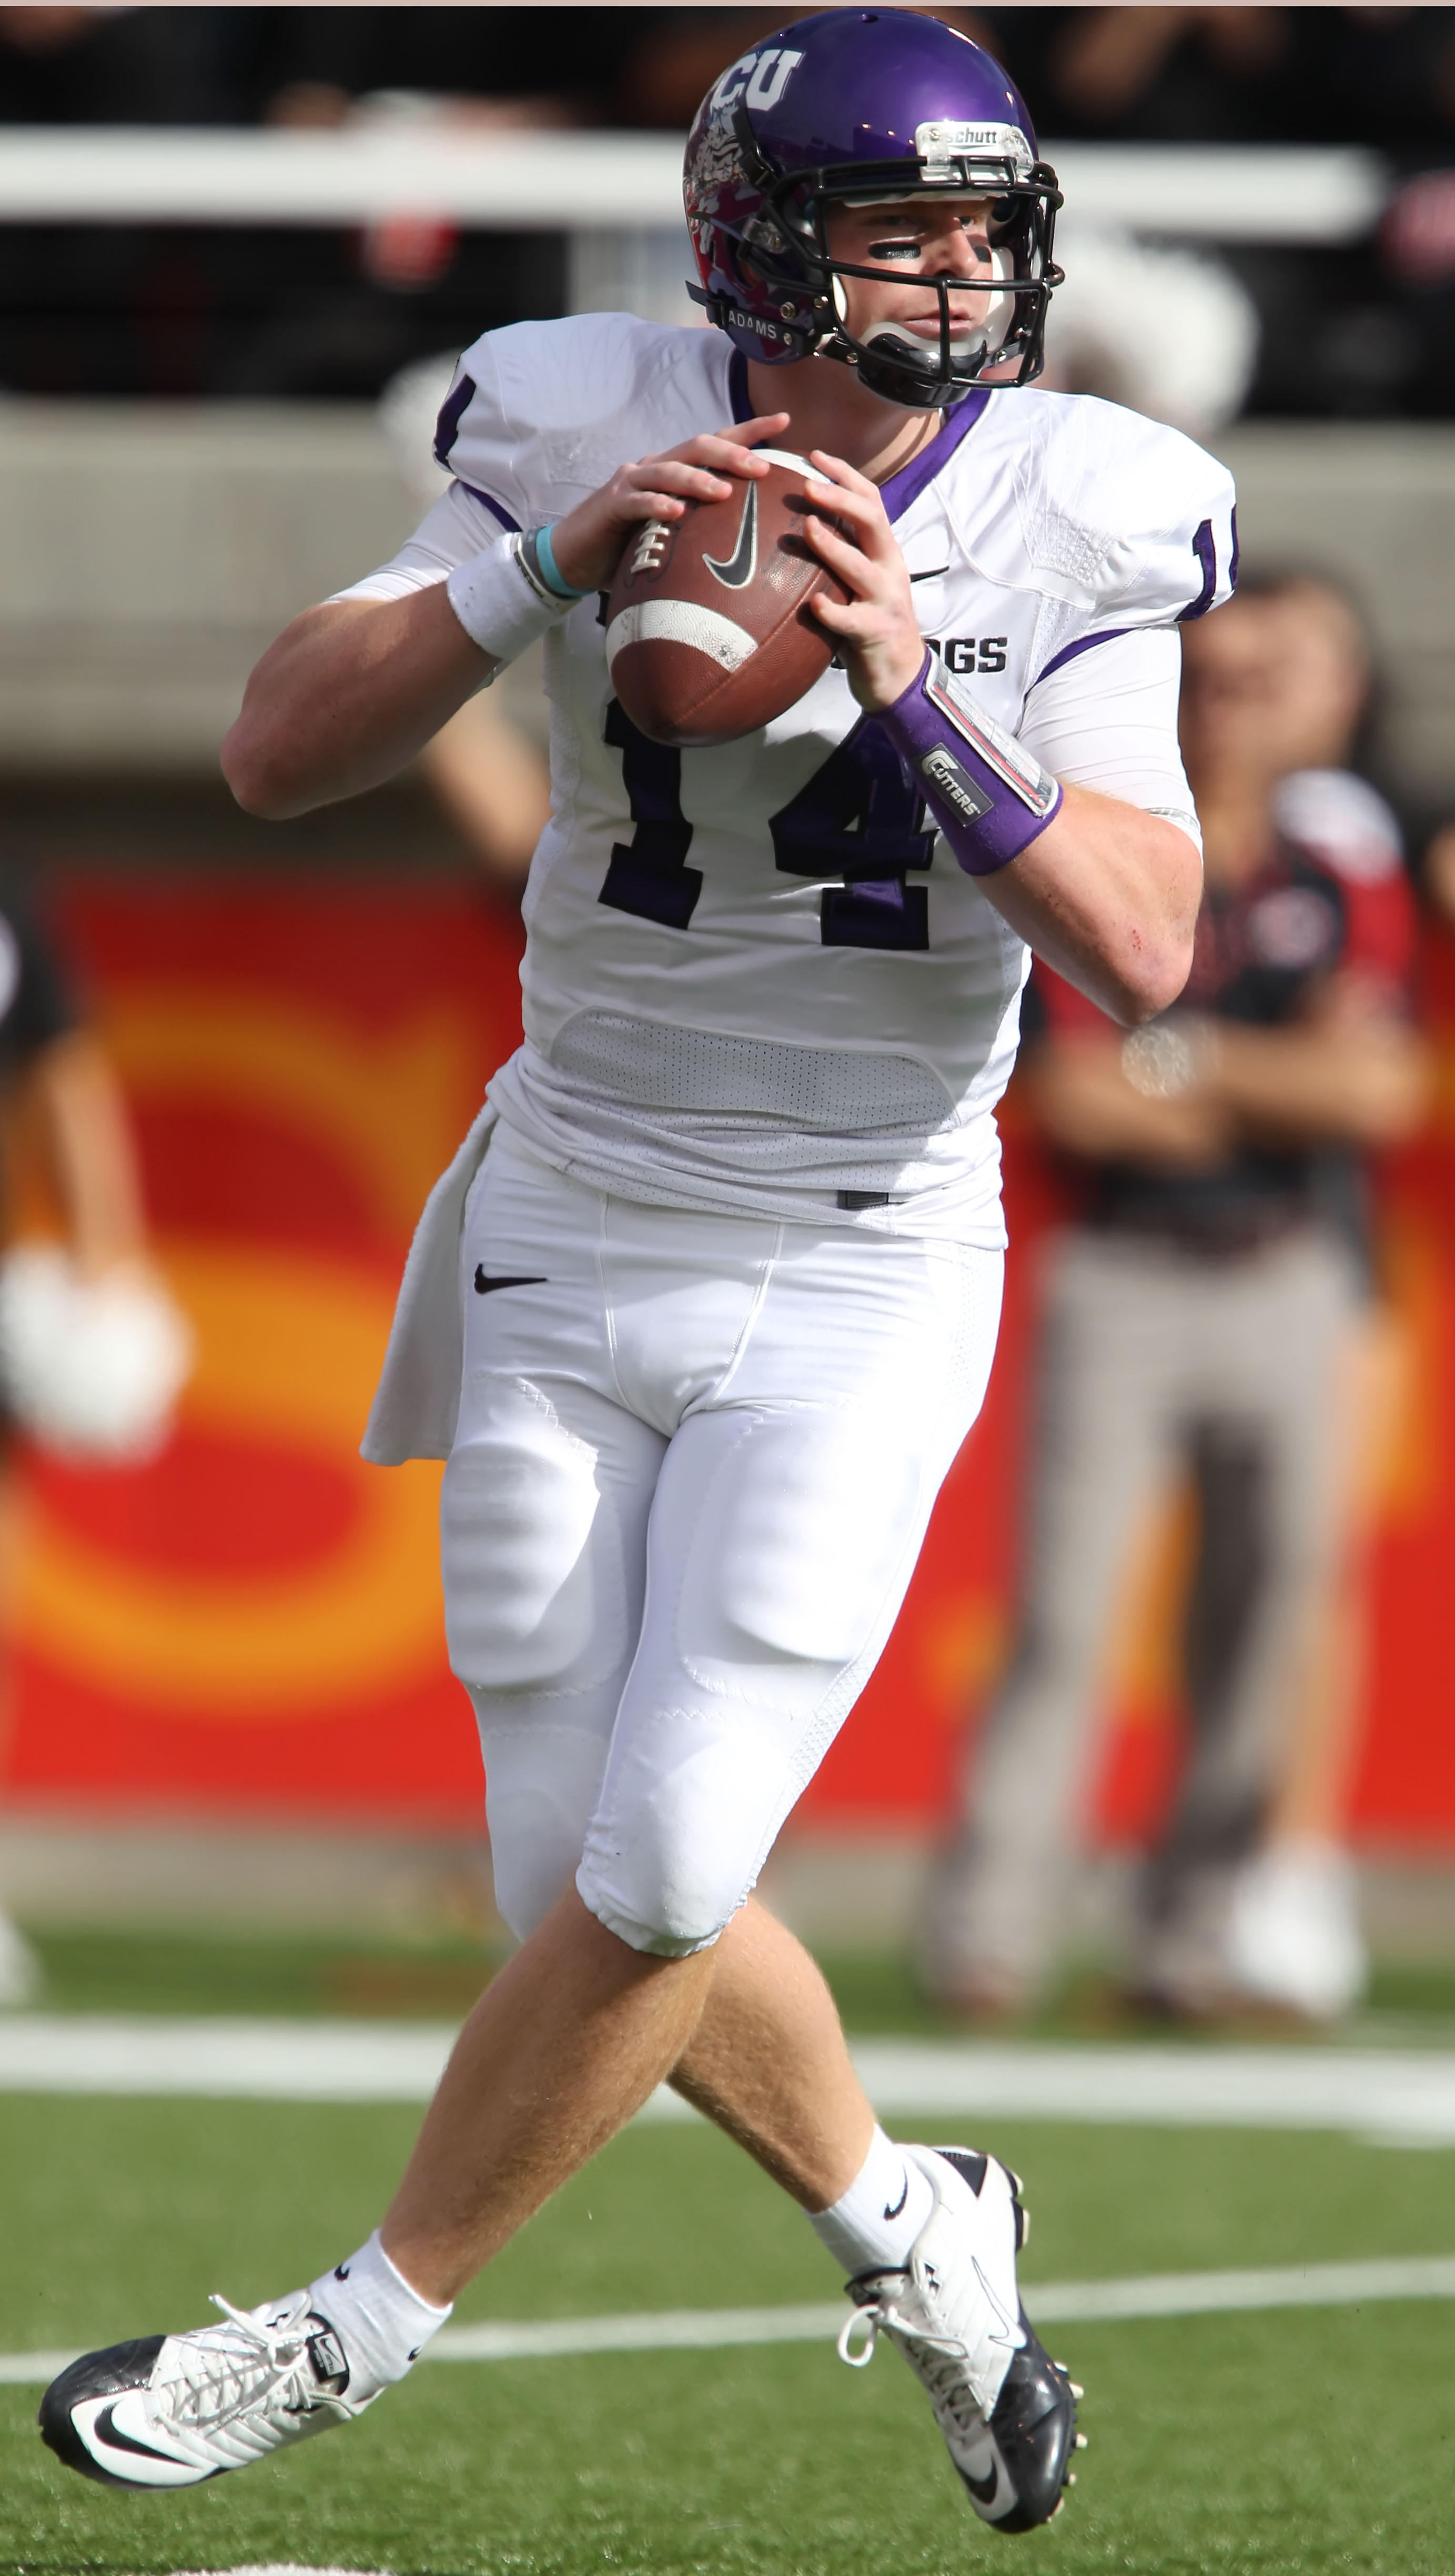 SALT LAKE CITY, UT - NOVEMBER 6: Andy Dalton #14 of the TCU Horned Frogs looks to pass during a game against the Utah Utes during the first half of an NCAA football game November 6, 2010 at Rice-Eccles Stadium in Salt Lake City, Utah. (Photo by George Fre